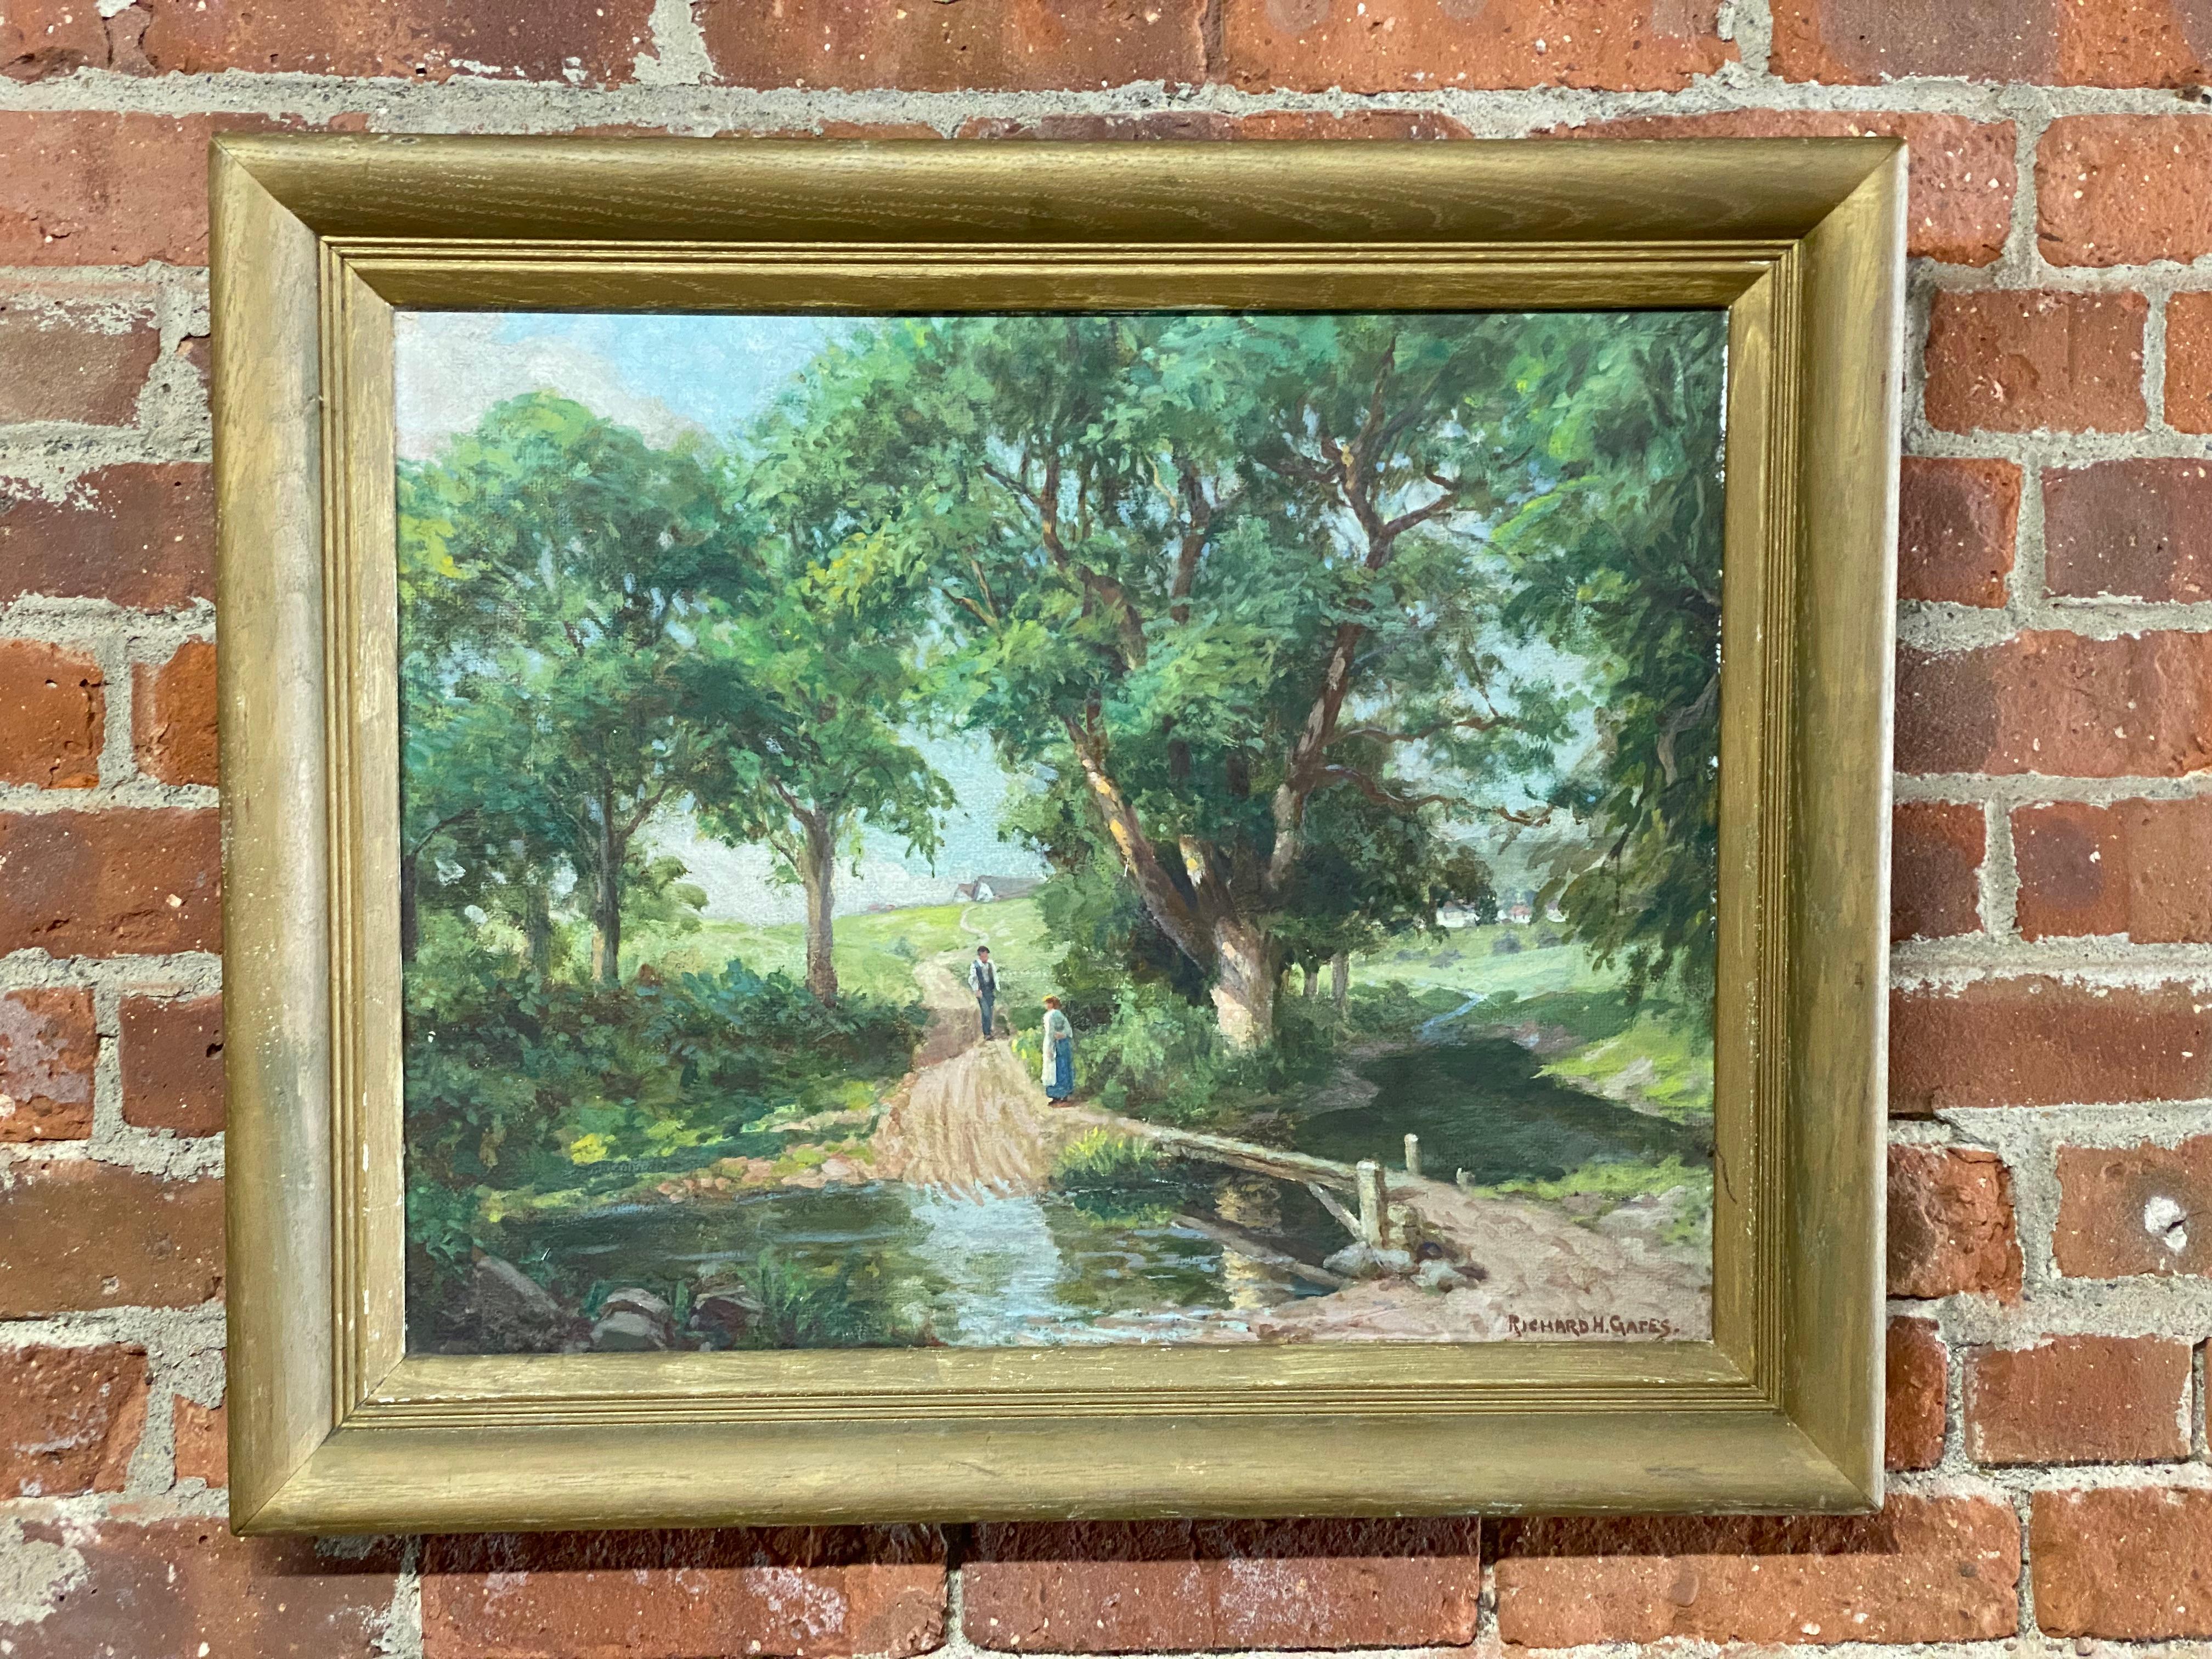 Oil on masonite board painting by Richard Henry Gates (1872-1964). Signed lower right, Richard H Gates, Circa 1920-40. Gates has produced a wonderful bucolic landscape of verdant trees, a village in the background and a small body of water with a